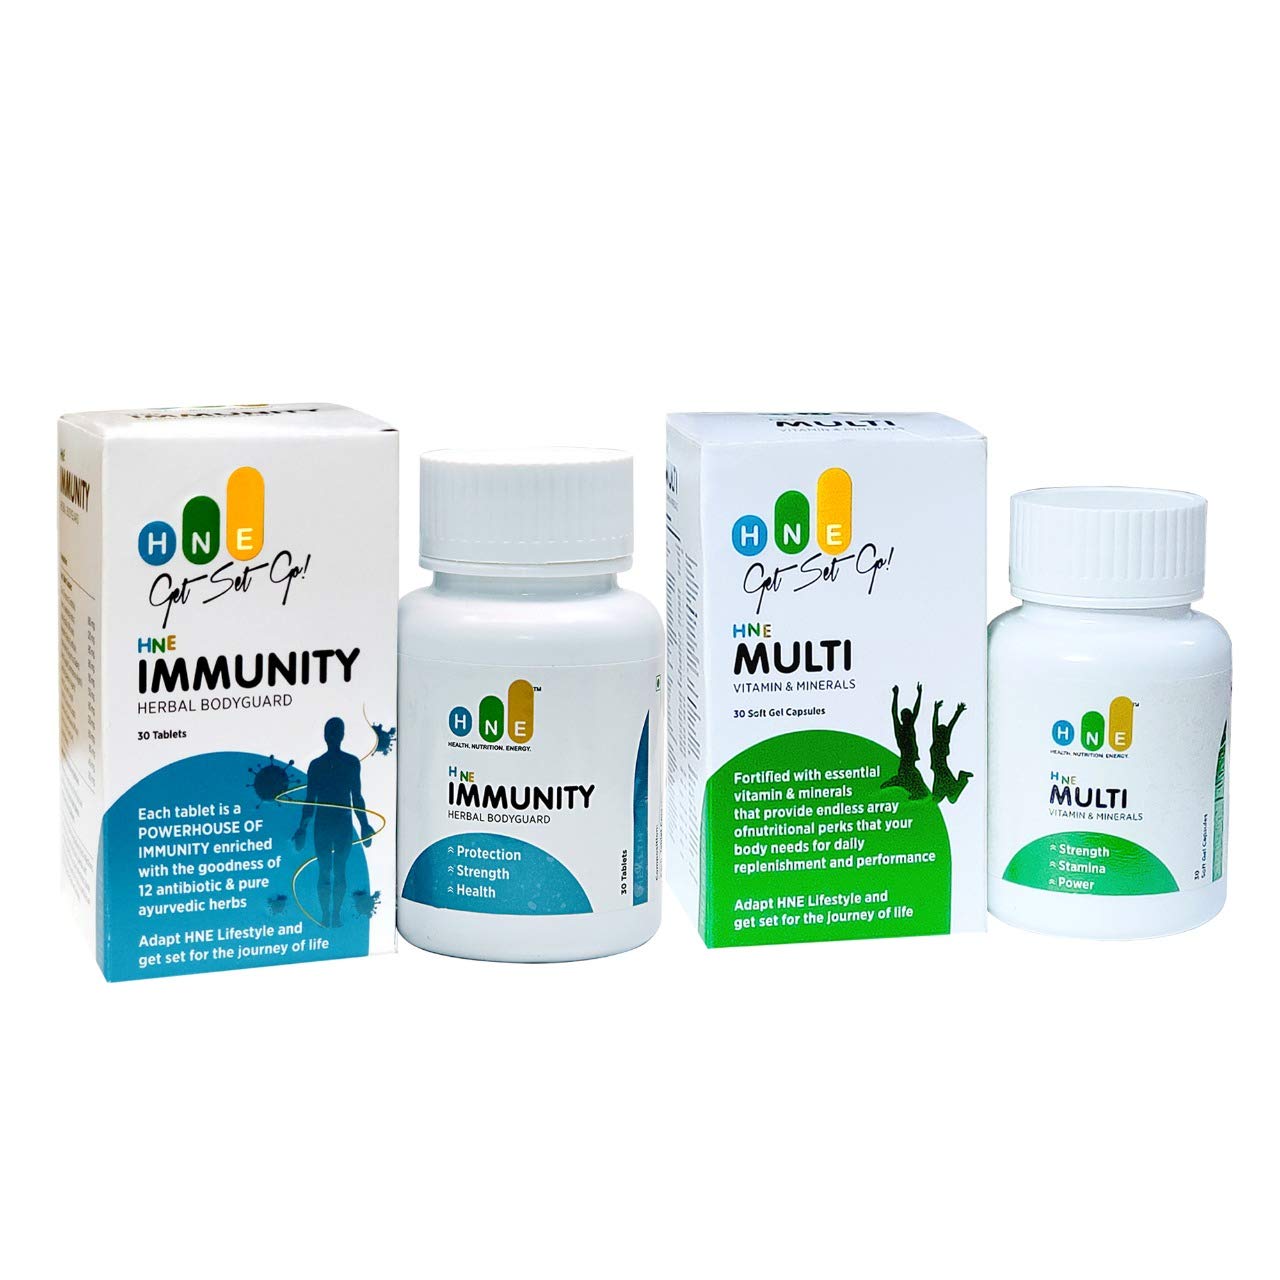 Product Name: HNE Immunity, Compositions of are Herbal Bodyguard - HNE Healthcare